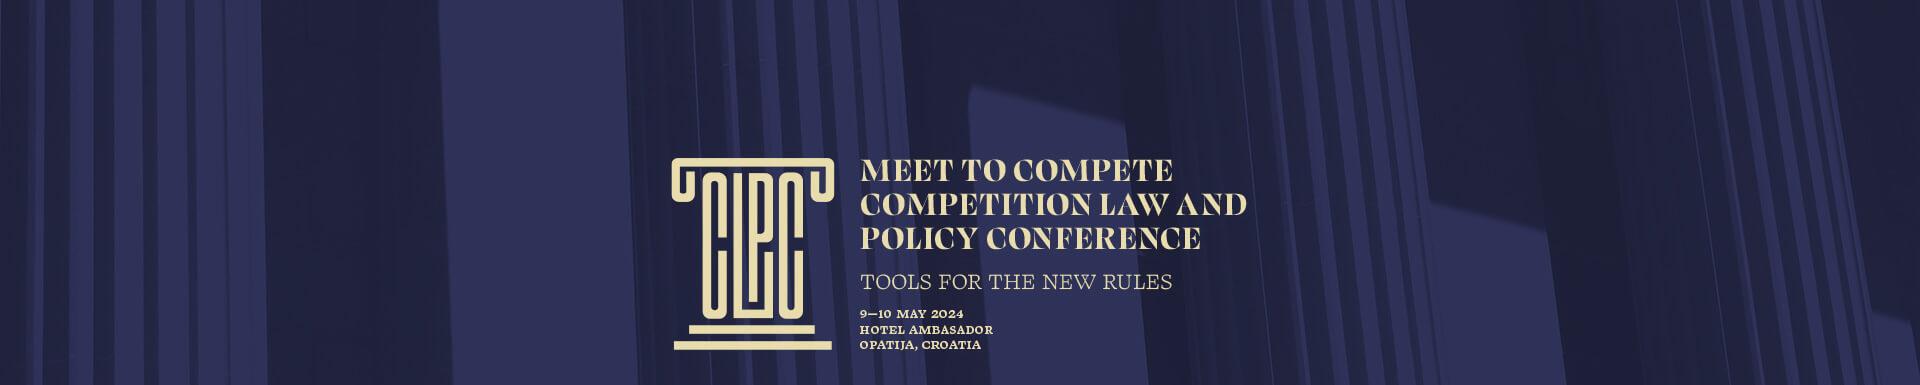  CONFERENCE ANNOUNCEMENT  MEET TO COMPETE COMPETITION LAW AND POLICY CONFERENCE “TOOLS FOR THE NEW RULES”